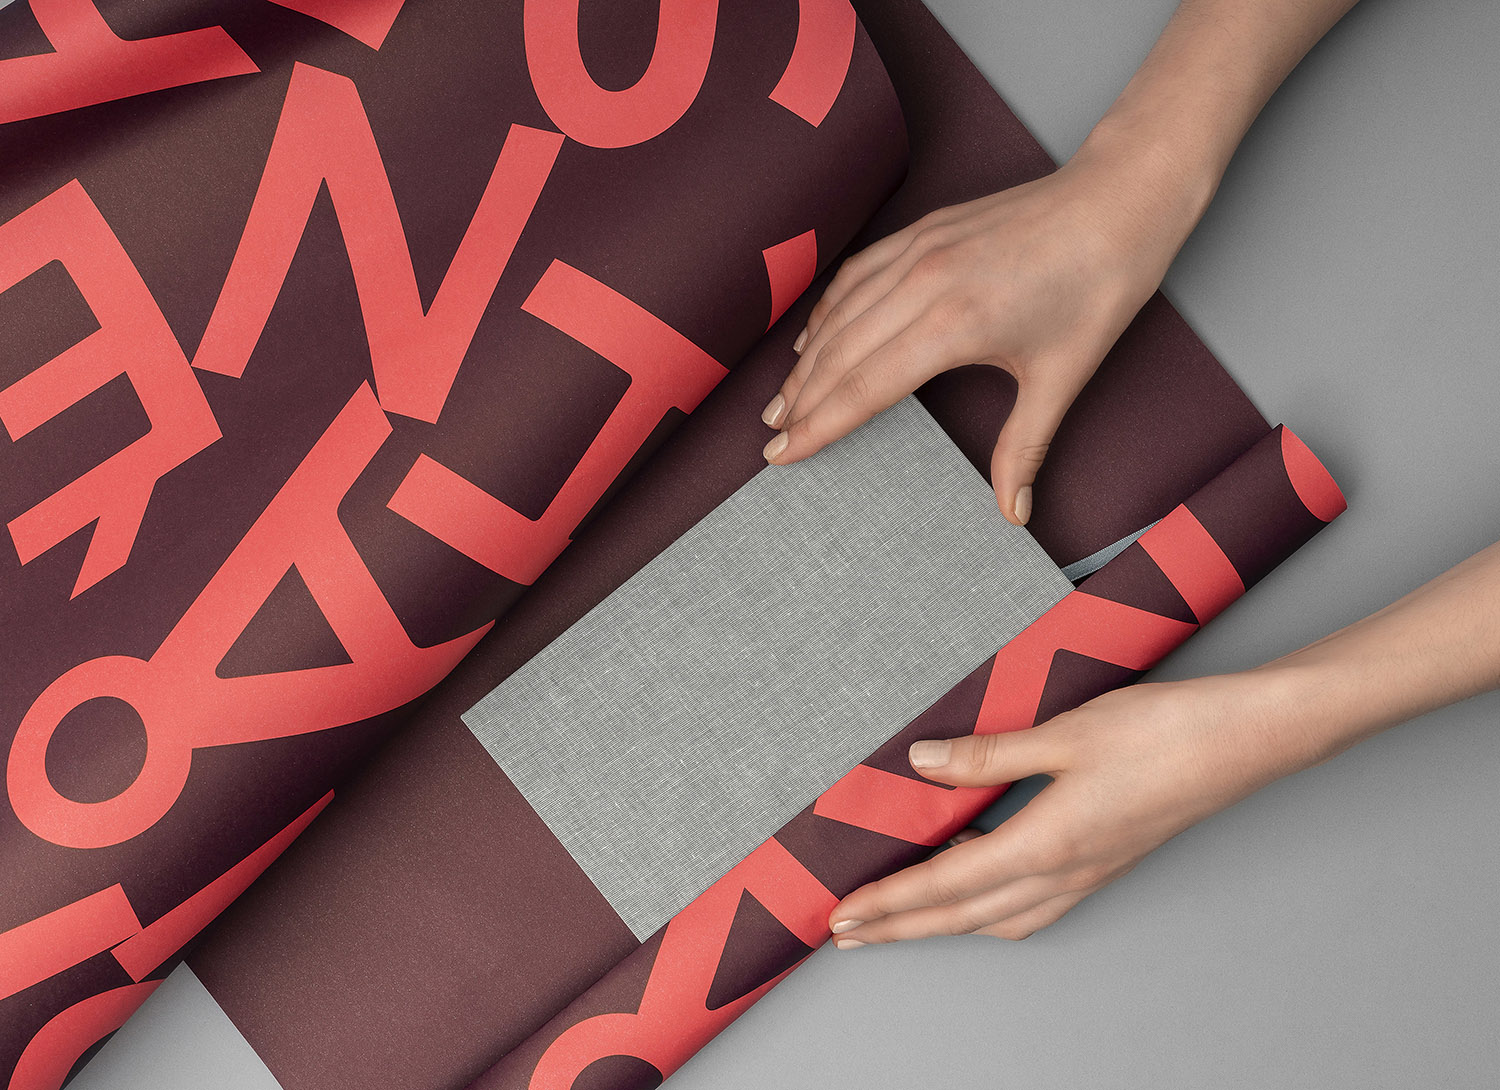 Visual identity and wrapping paper by Happy FB for Swedish retailer Åhléns